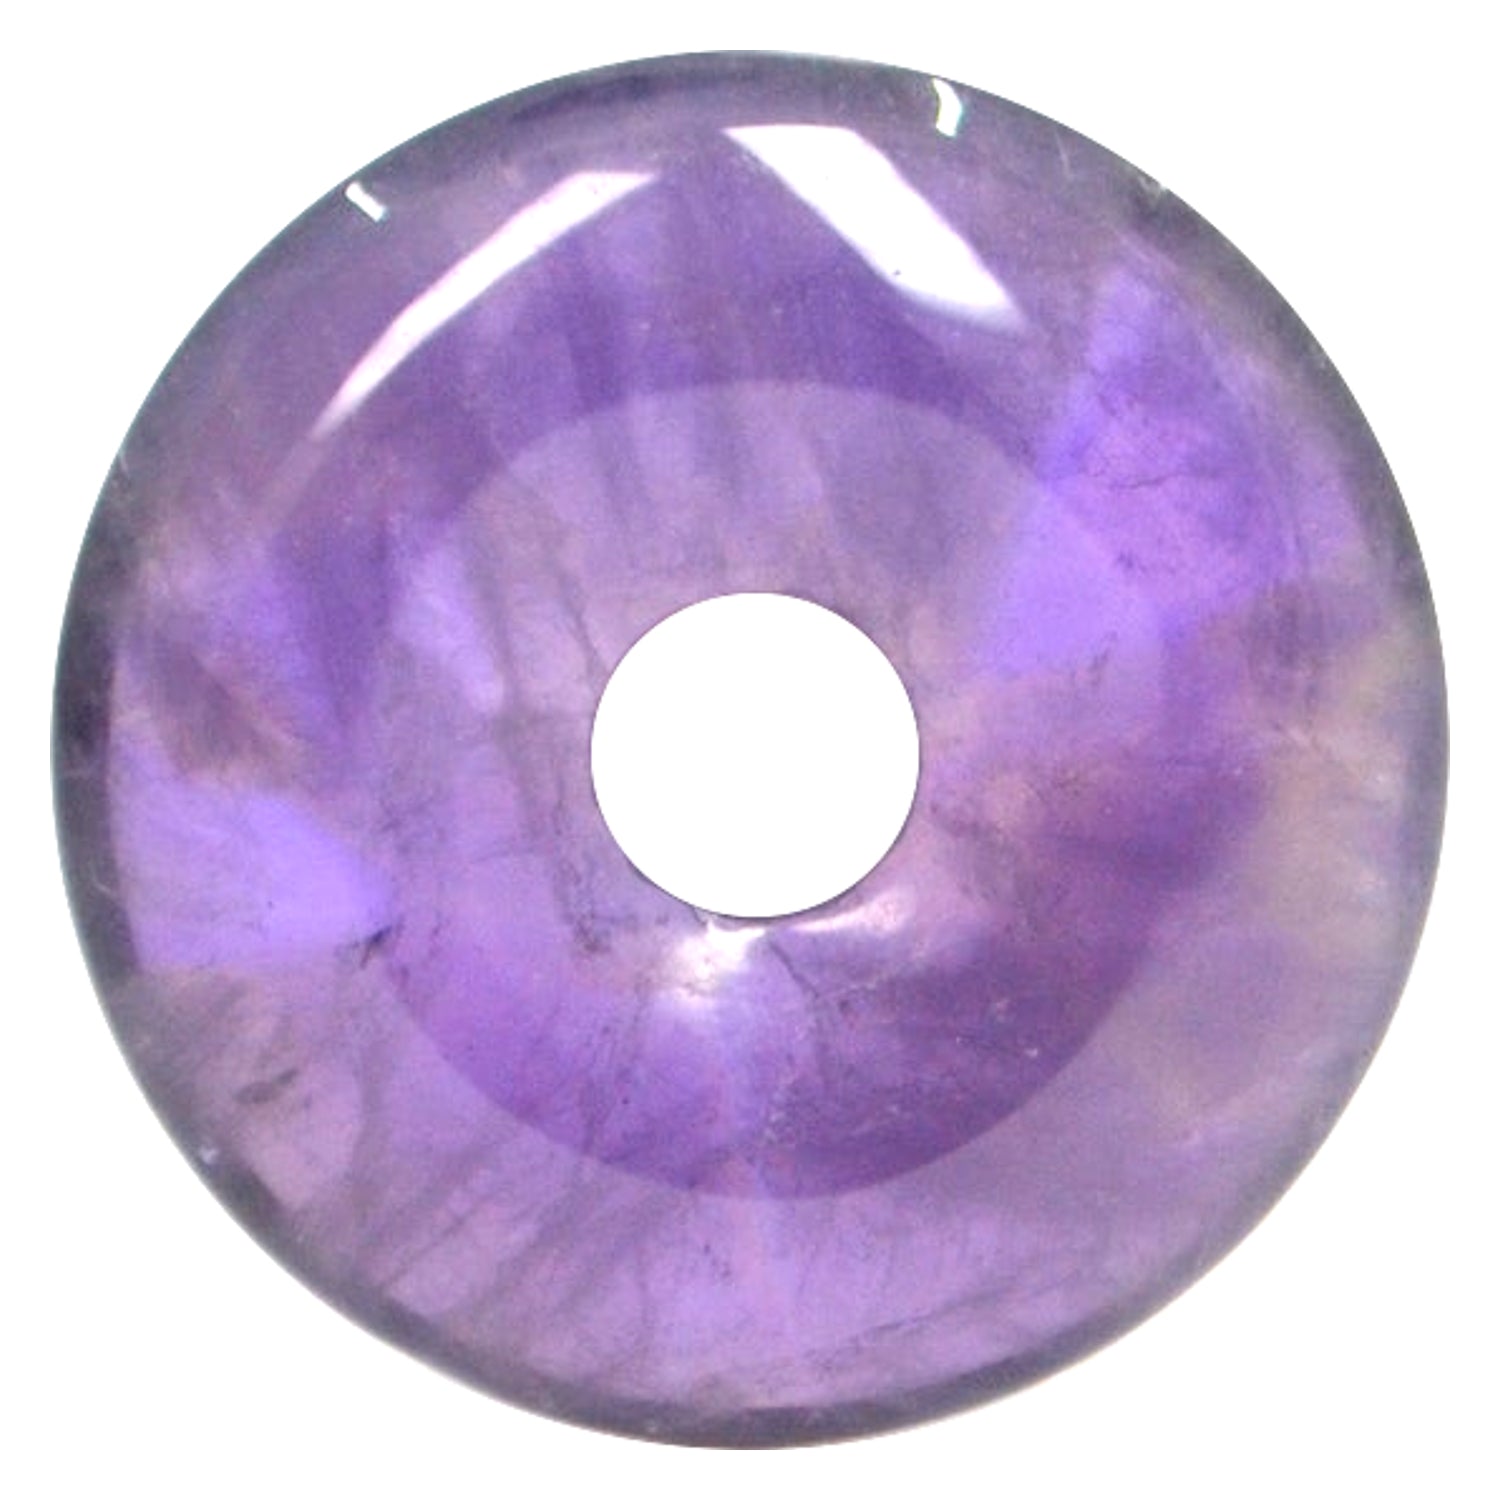 Purple circular donut shape with marble pattern